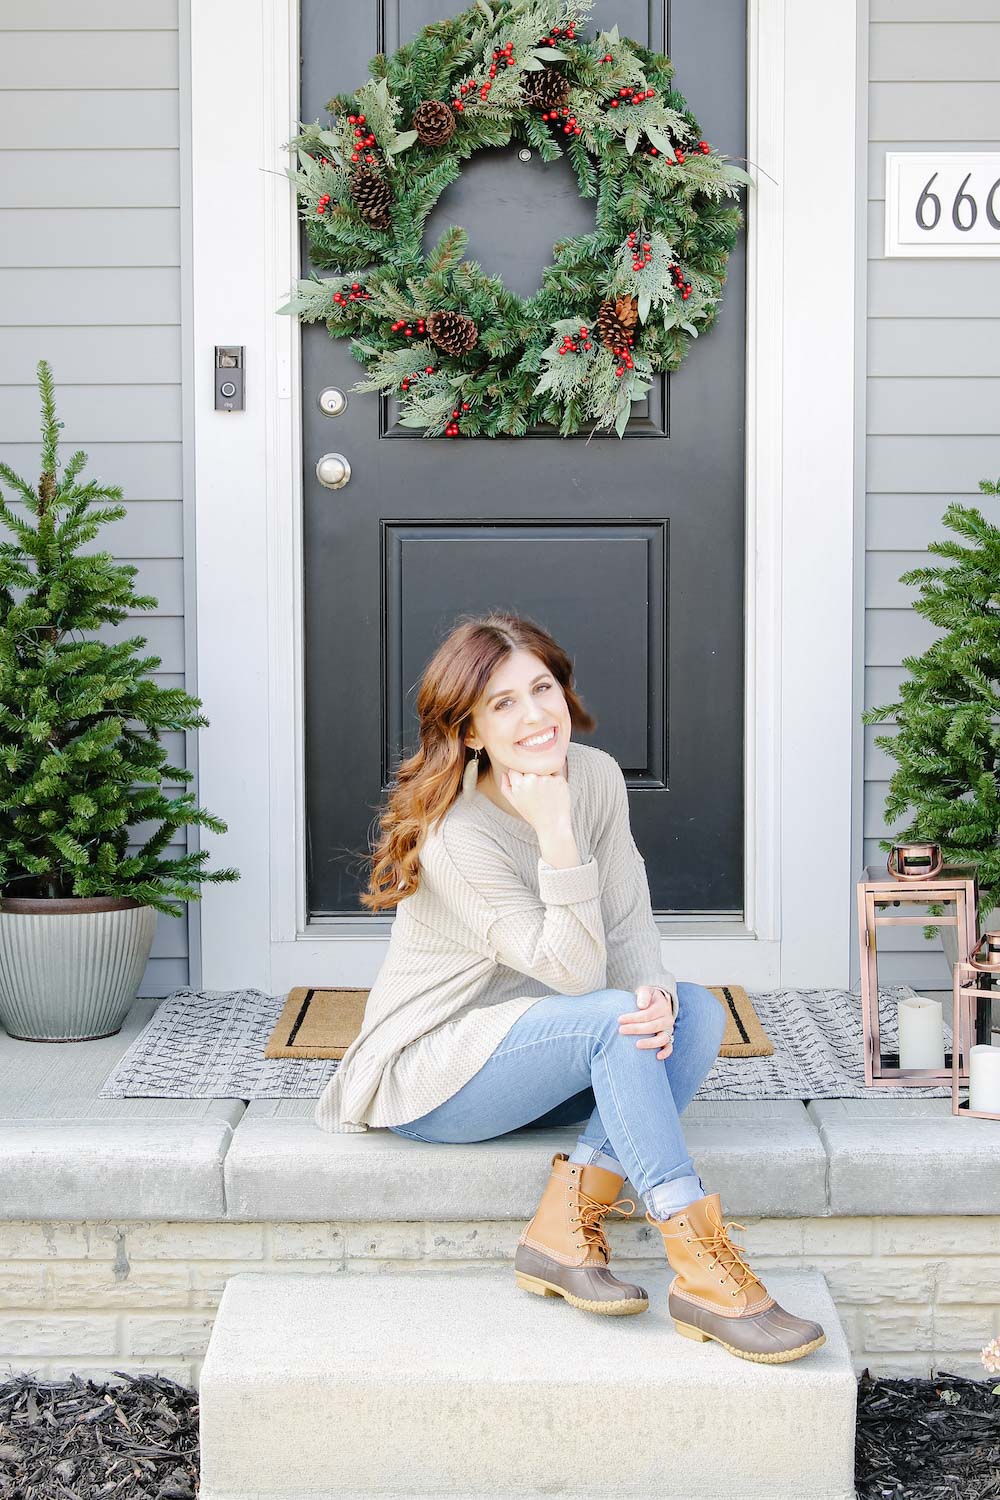 A woman poses on porch in front of oversized holiday wreath and porch trees styled with bronze lanterns